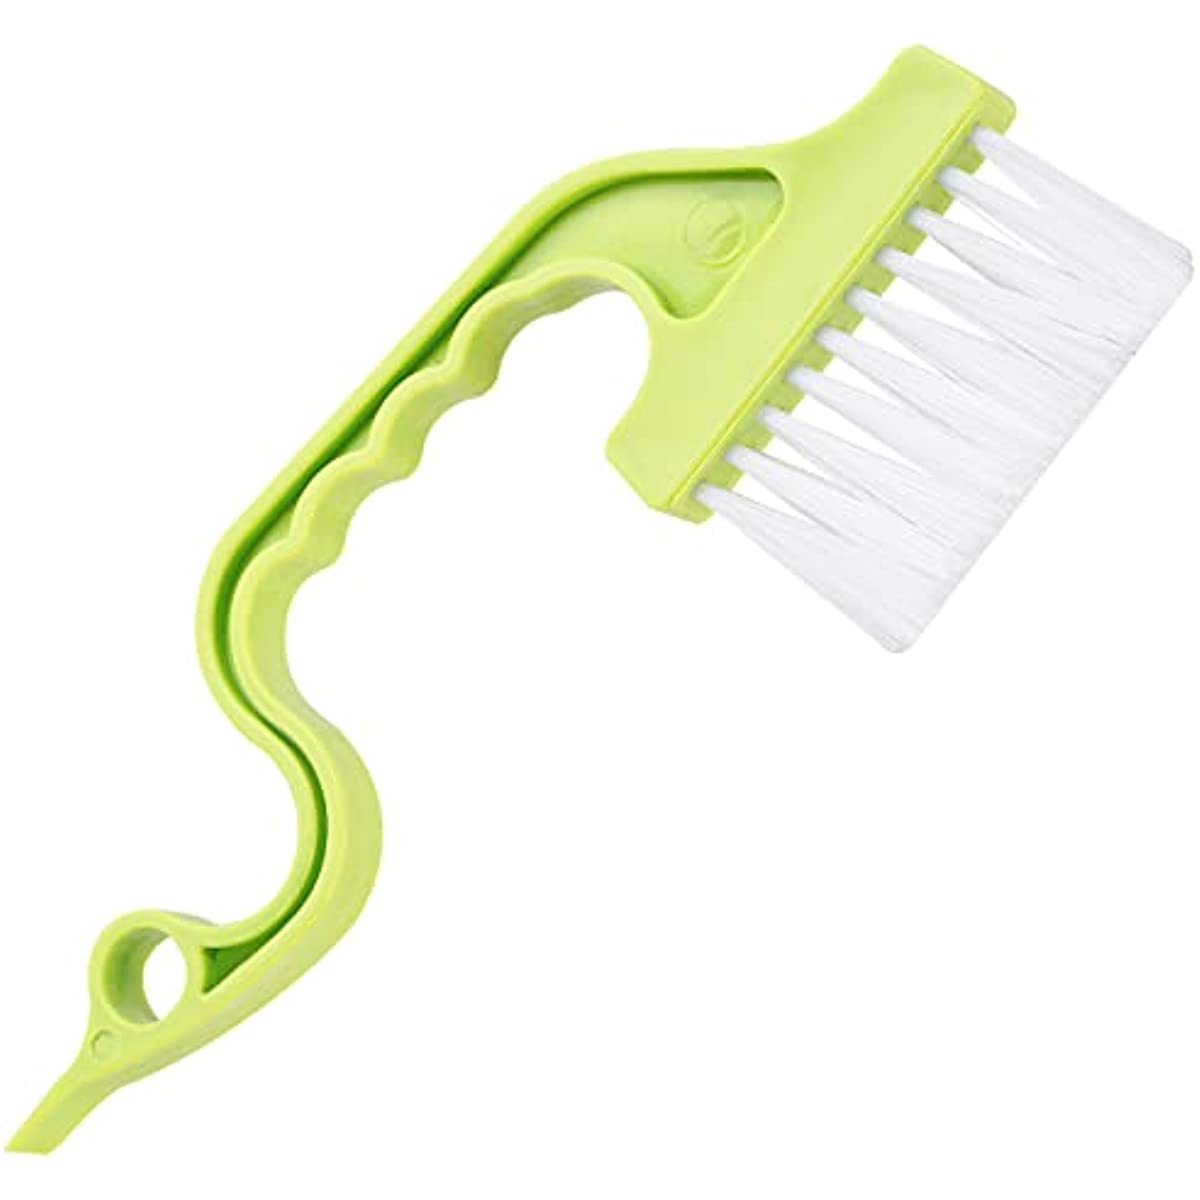 2pcs Hand-held Groove Gap Cleaning Tools Door Window Track Kitchen Cleaning  Brushes(Green) 